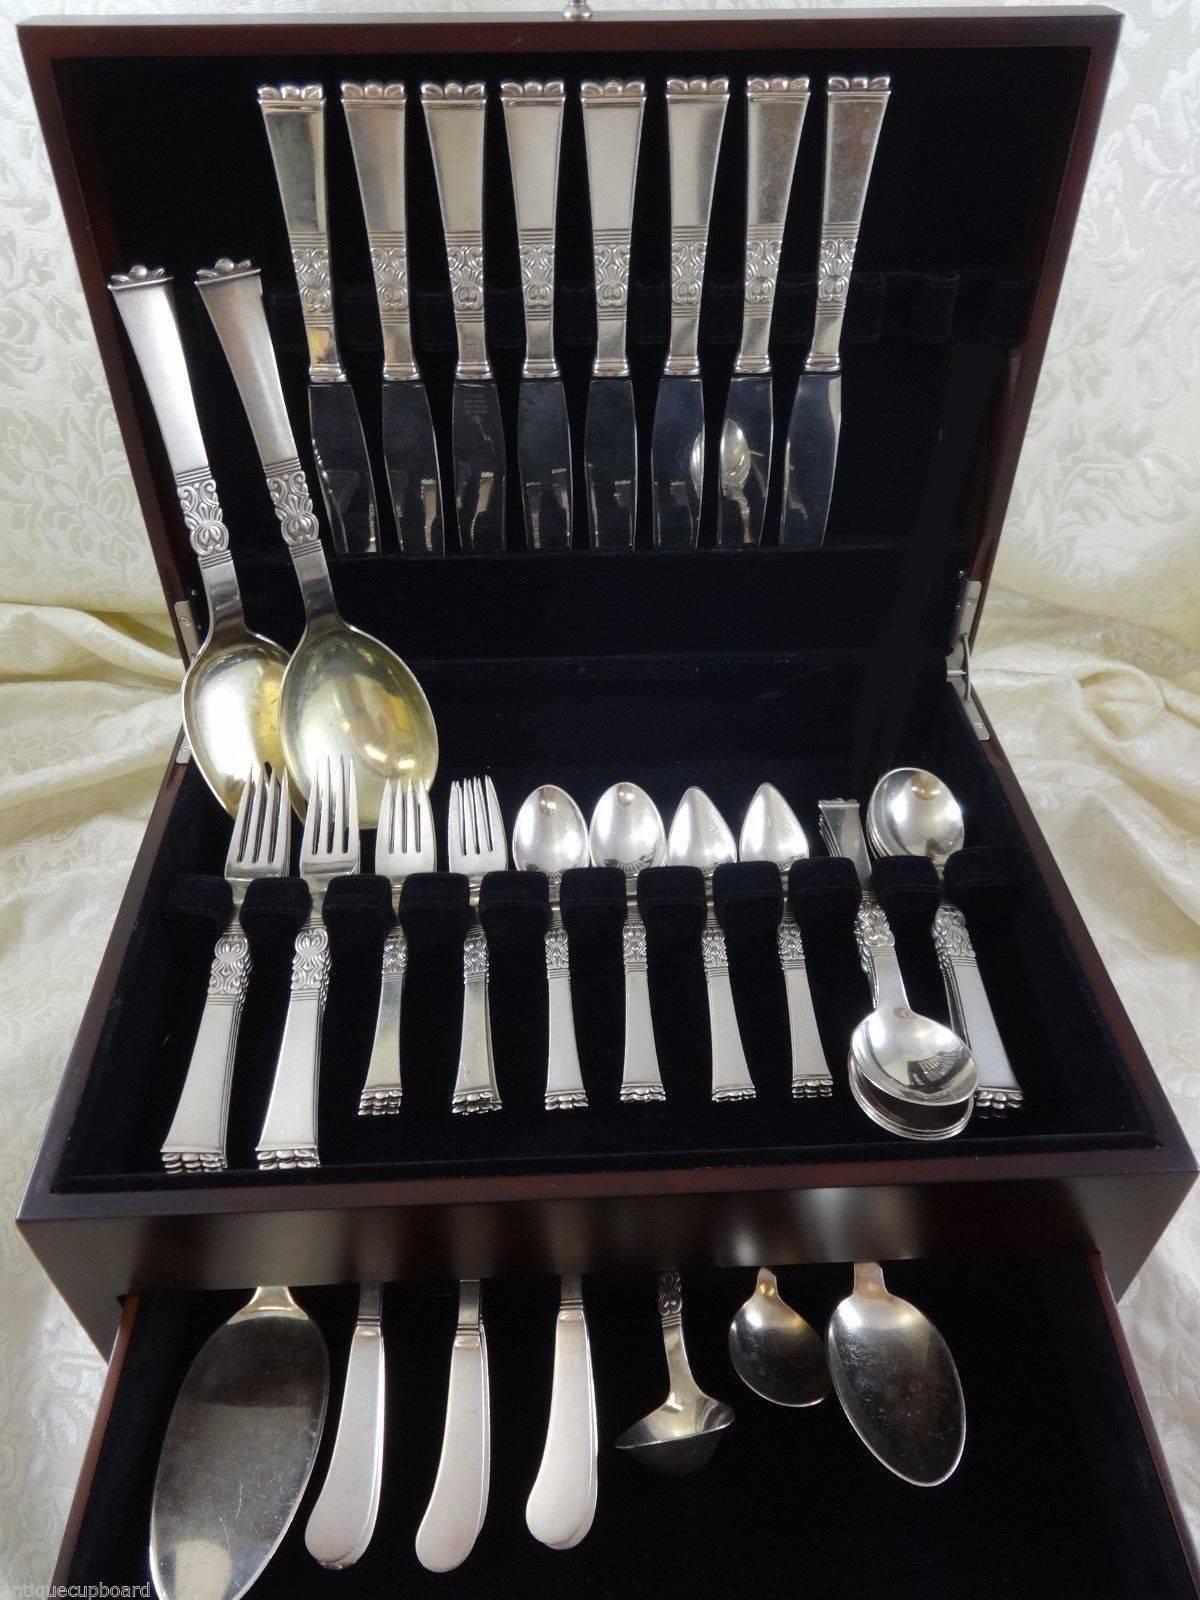 Stunning Rigs by Frigast Silversmiths of Copenhagen, Denmark sterling silver flatware set of 60 pieces. This set includes:

Eight dinner size knives, 9 3/4